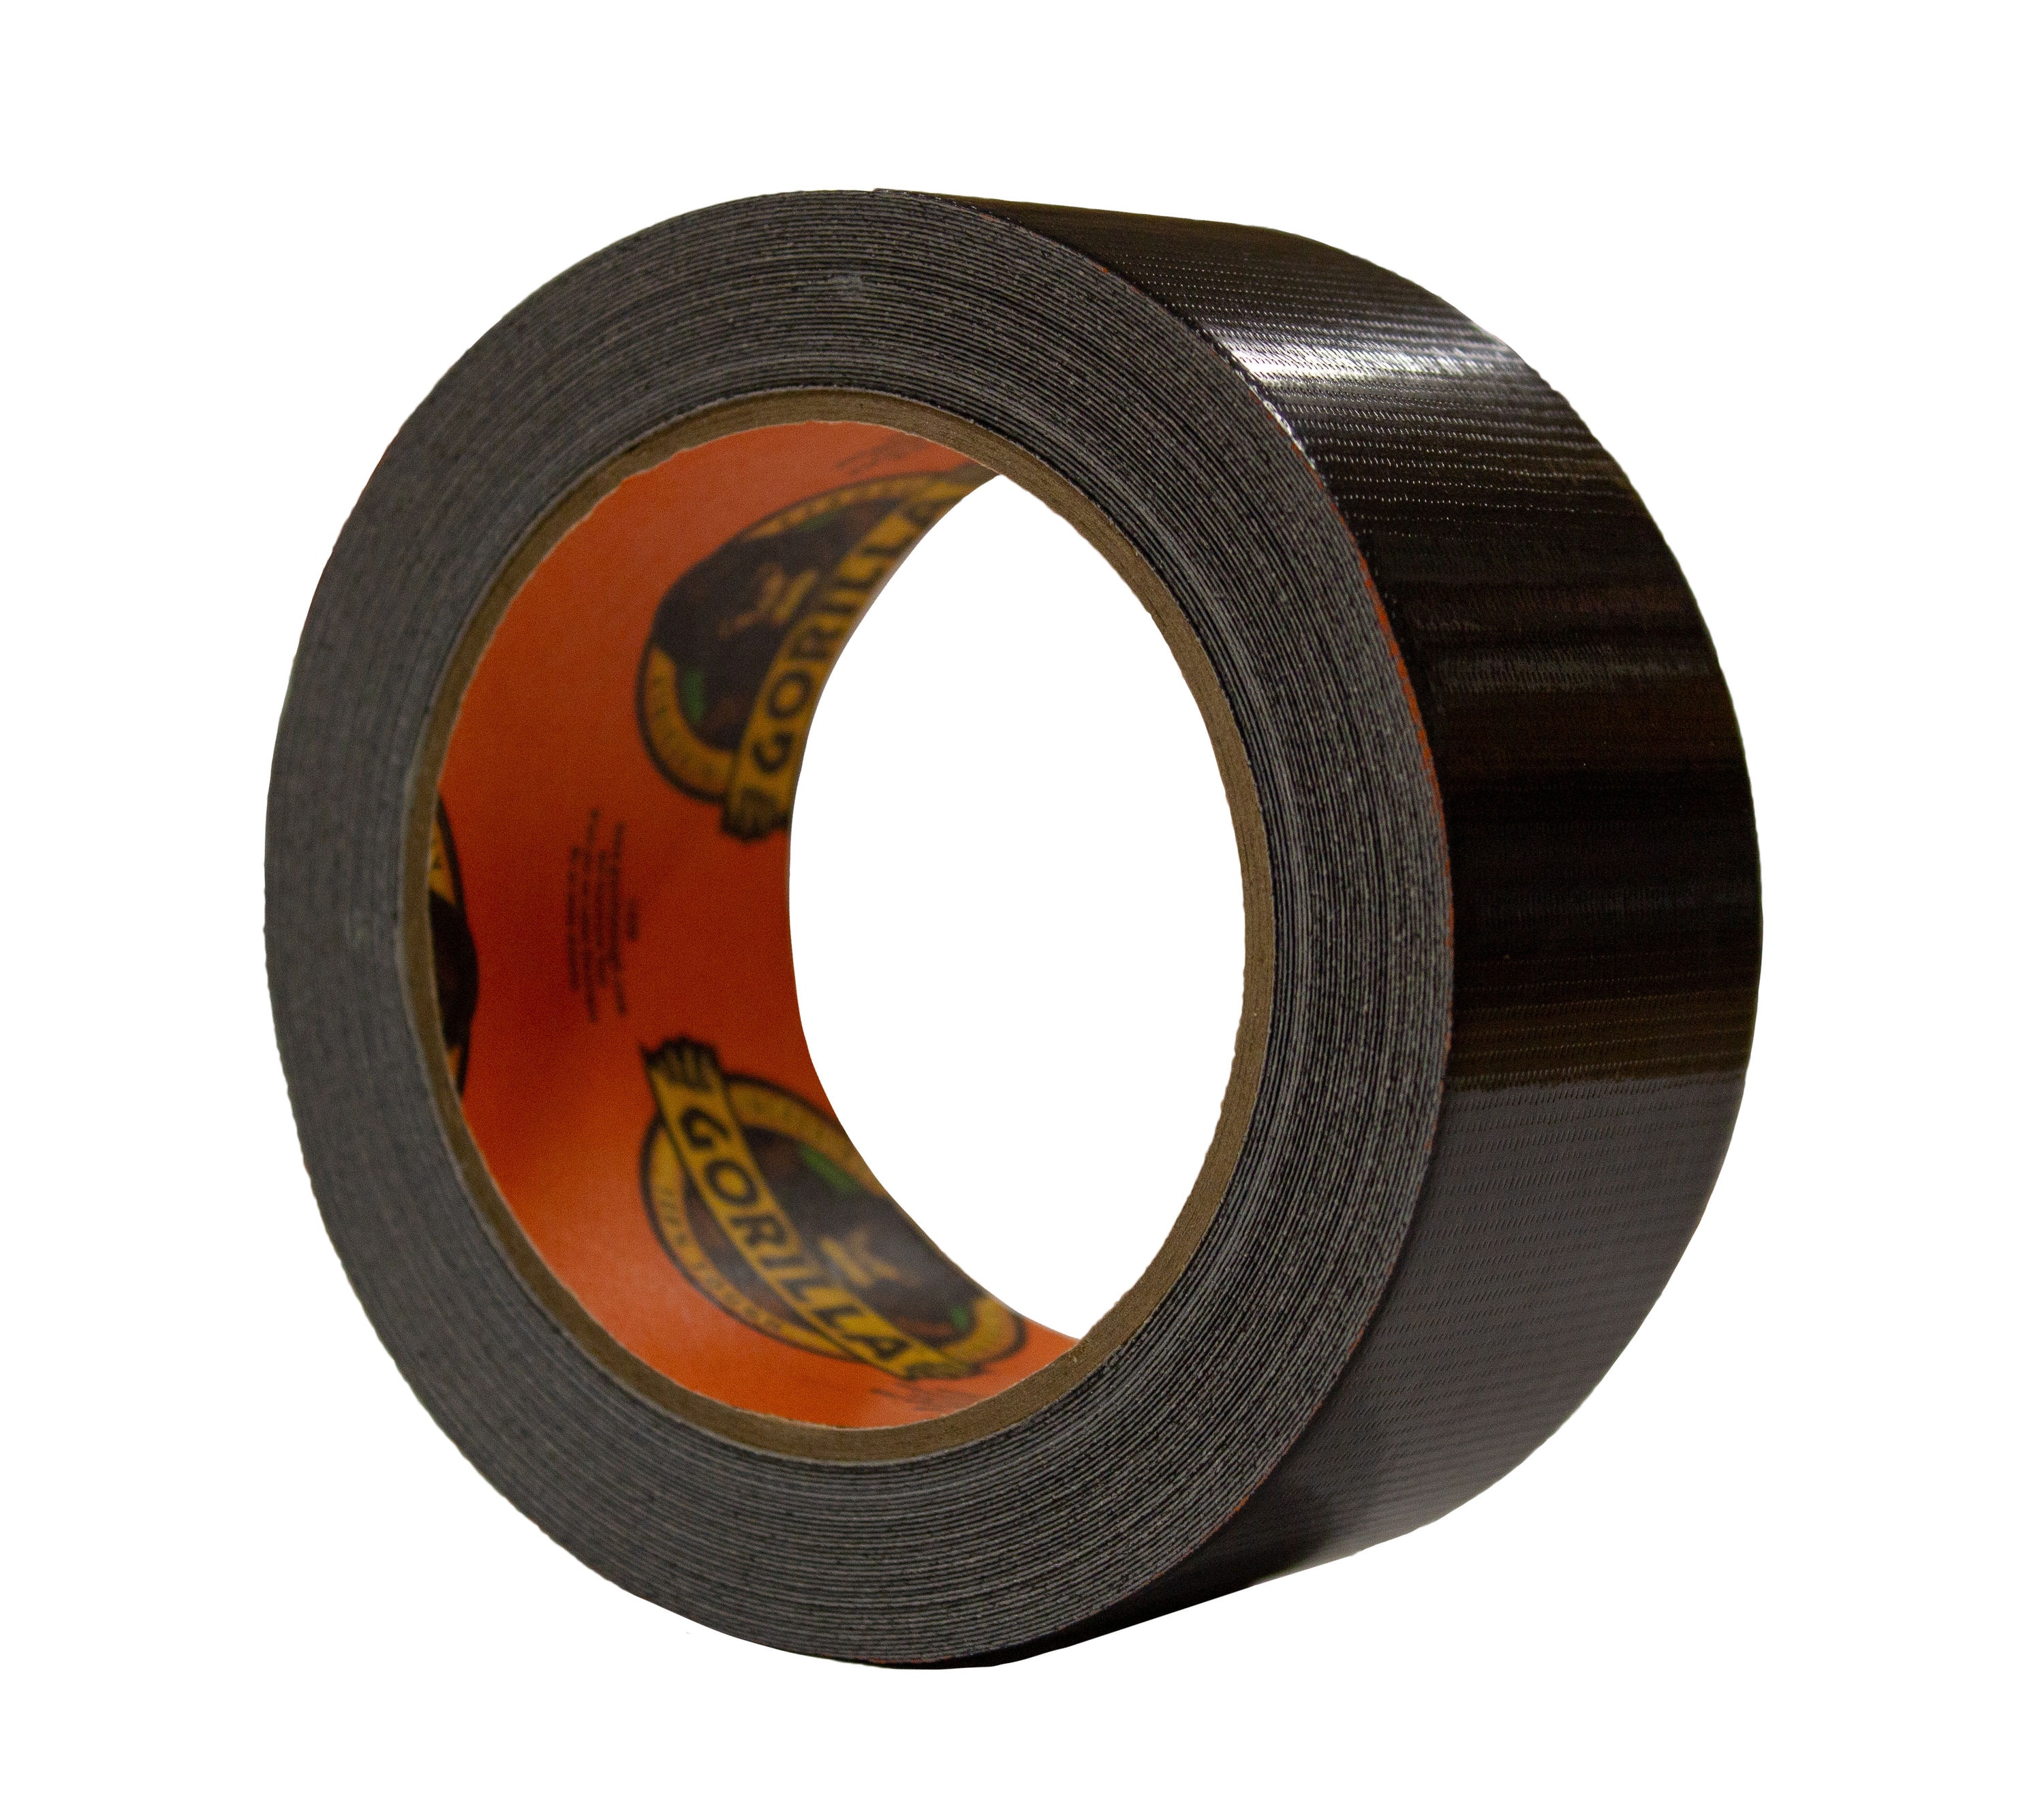 Gorilla Black Duct Tape 1.88-in x 10 Yard(s) in the Duct Tape